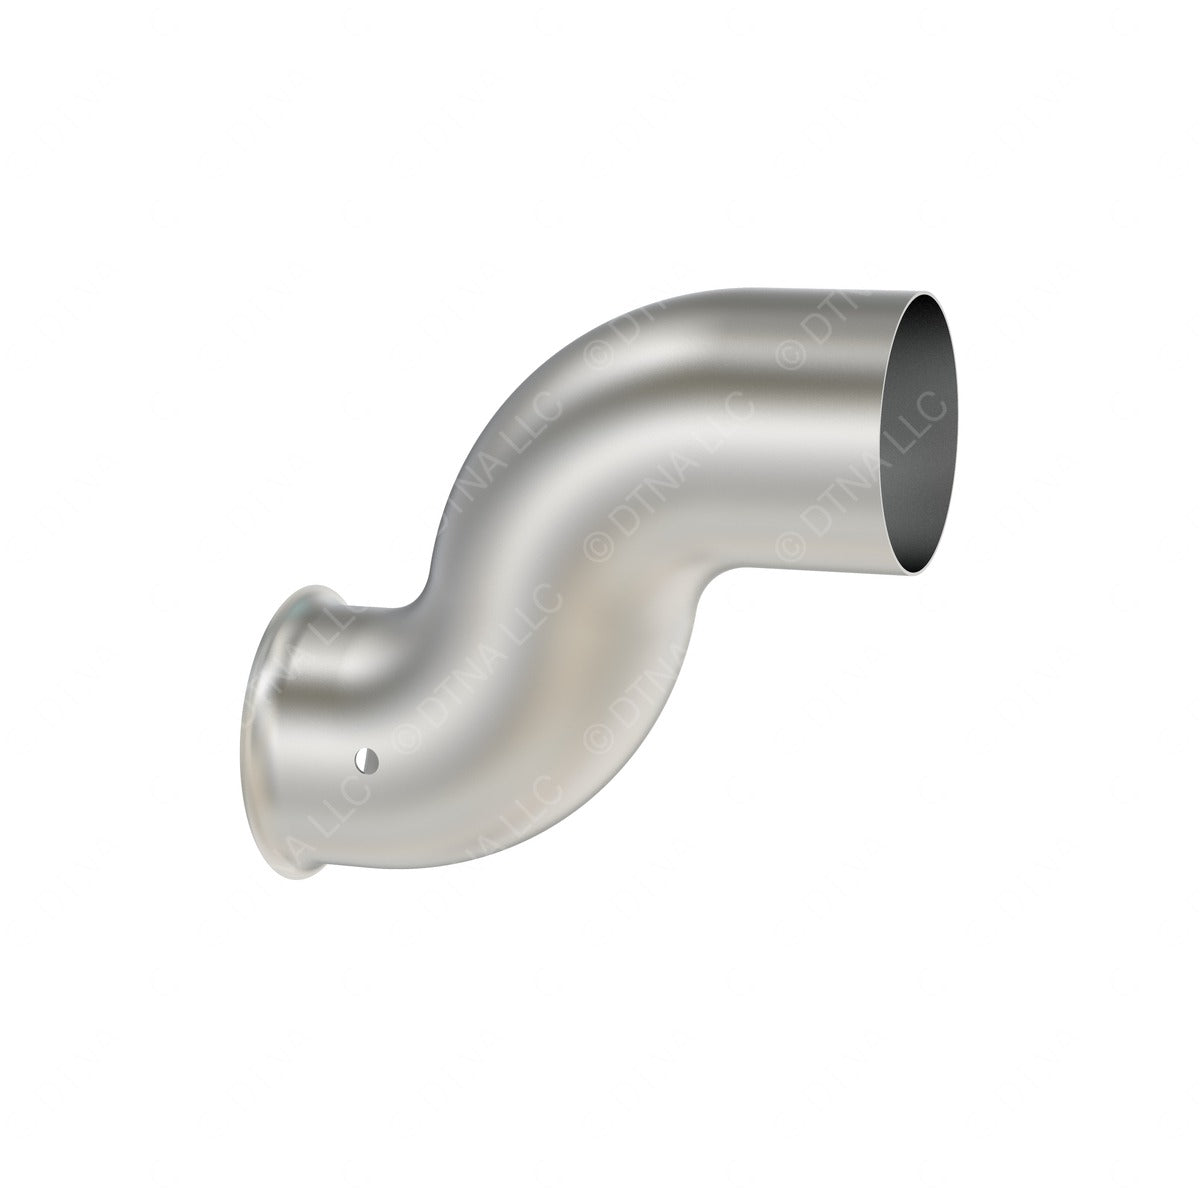 04-17094-022 -PIPE - EXHAUST, 5 INCH